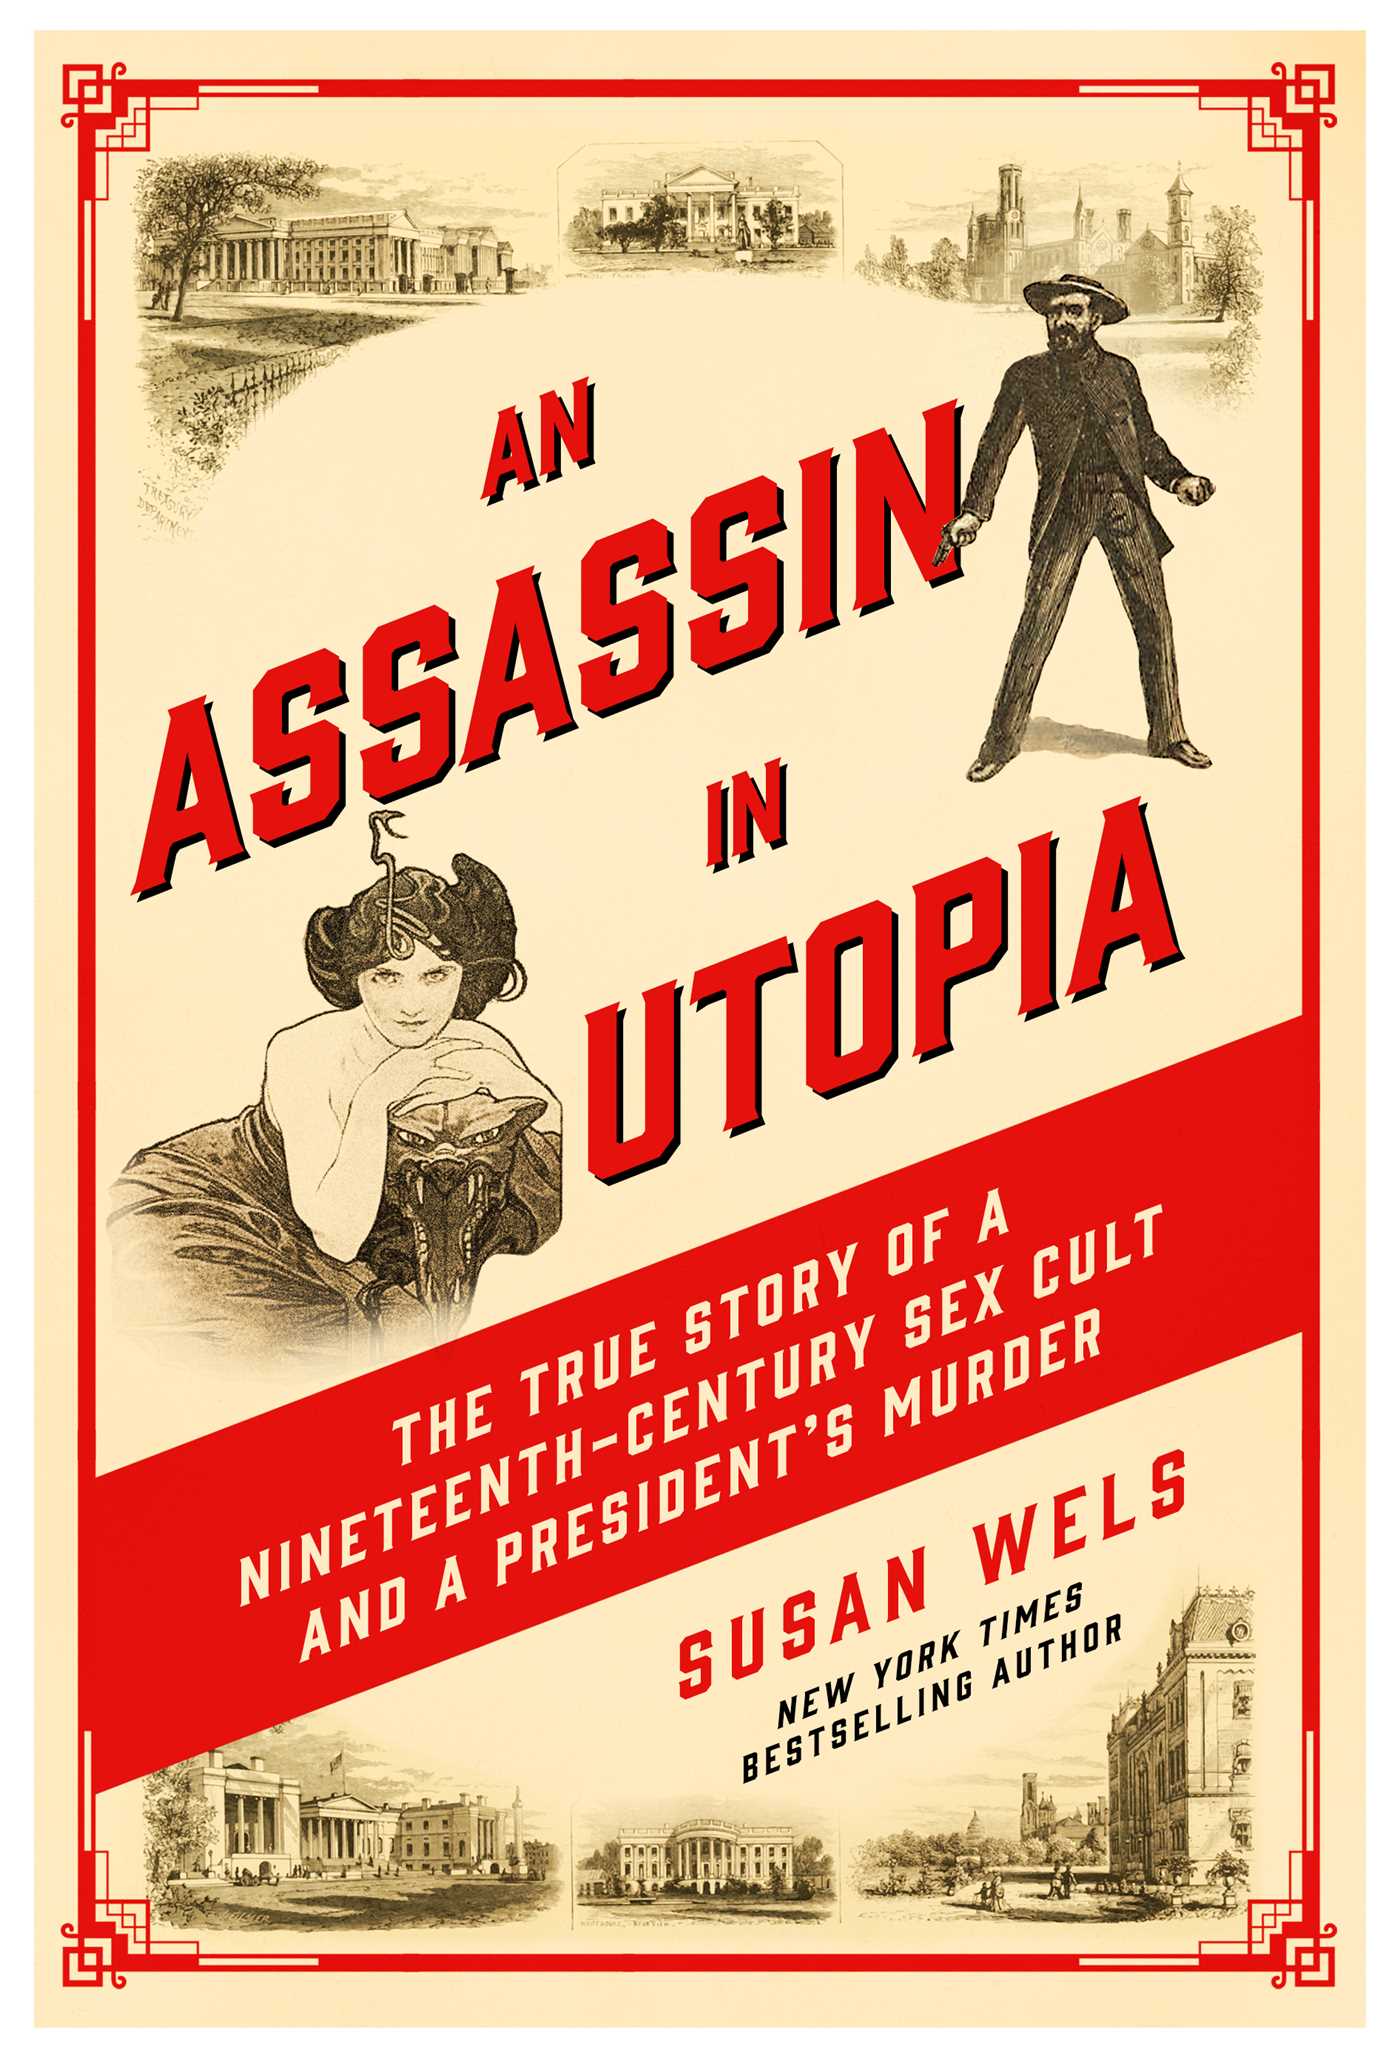 An Assassin in Utopia: The True Story of a Nineteenth-Century Sex Cult and a President’s Murder by Susan Wels